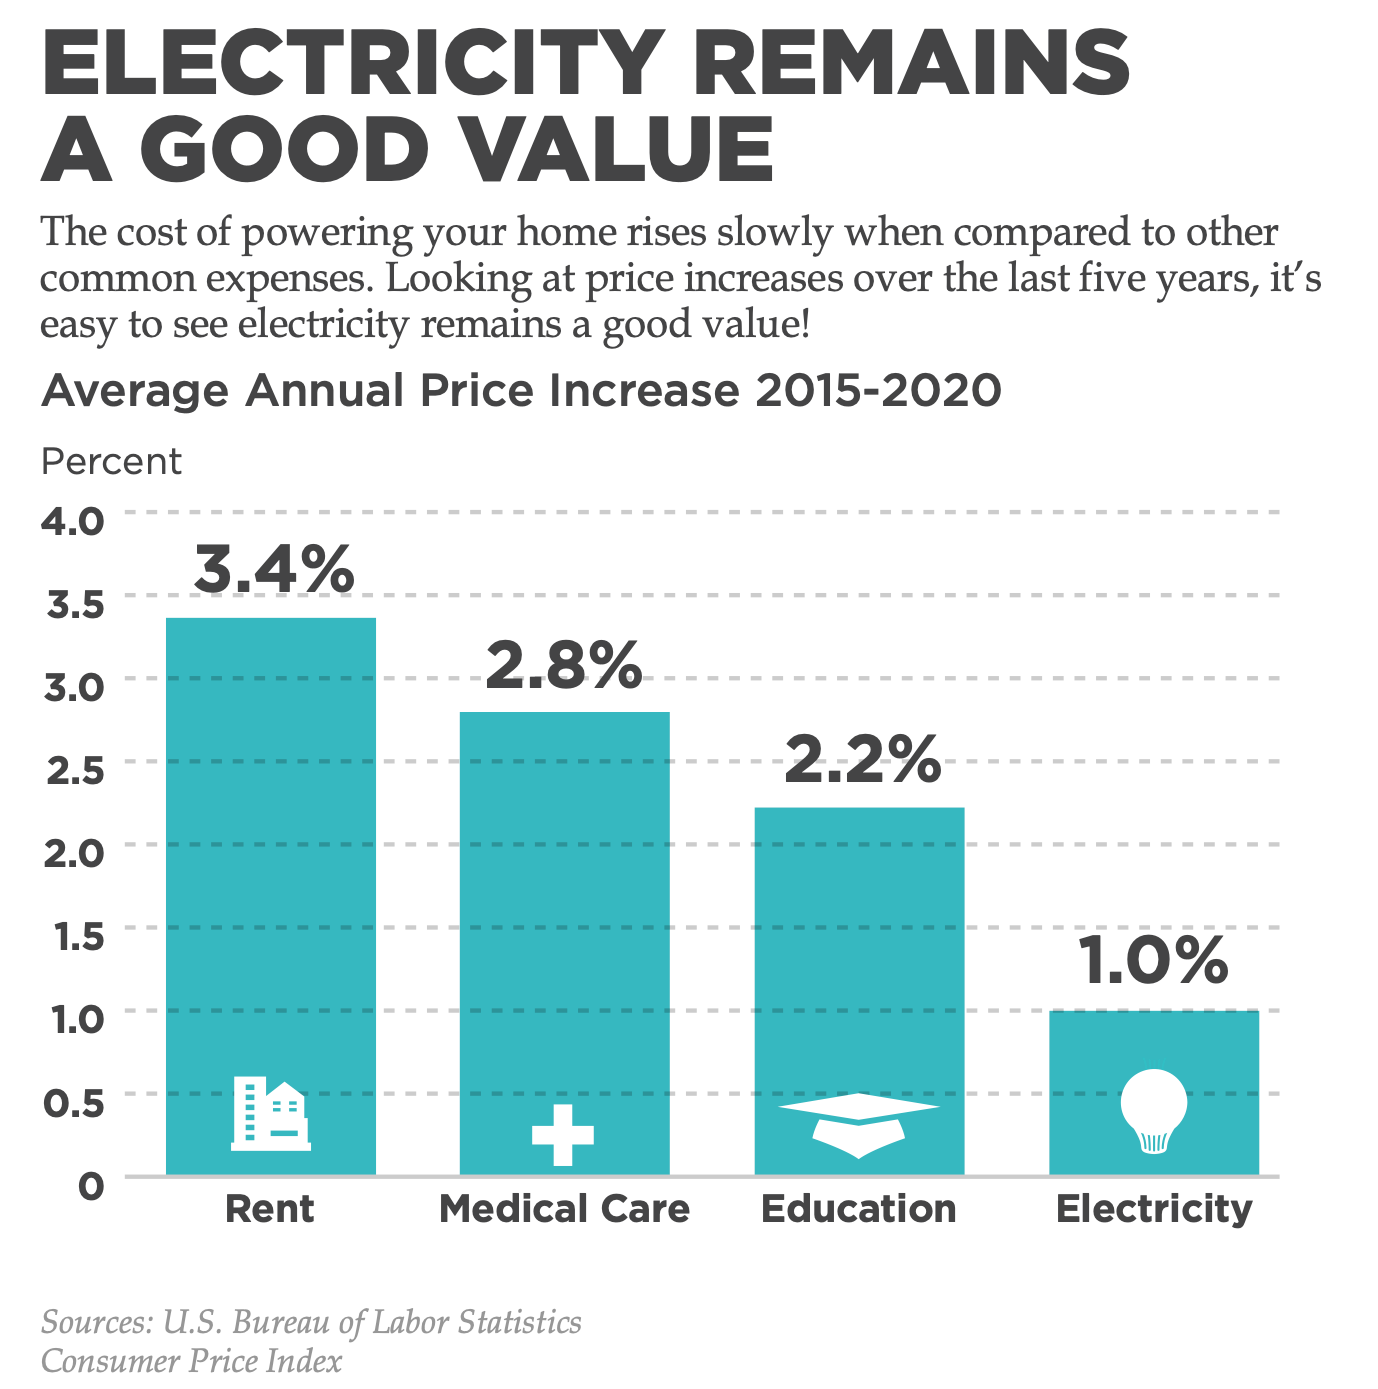 Electricity is a great value!